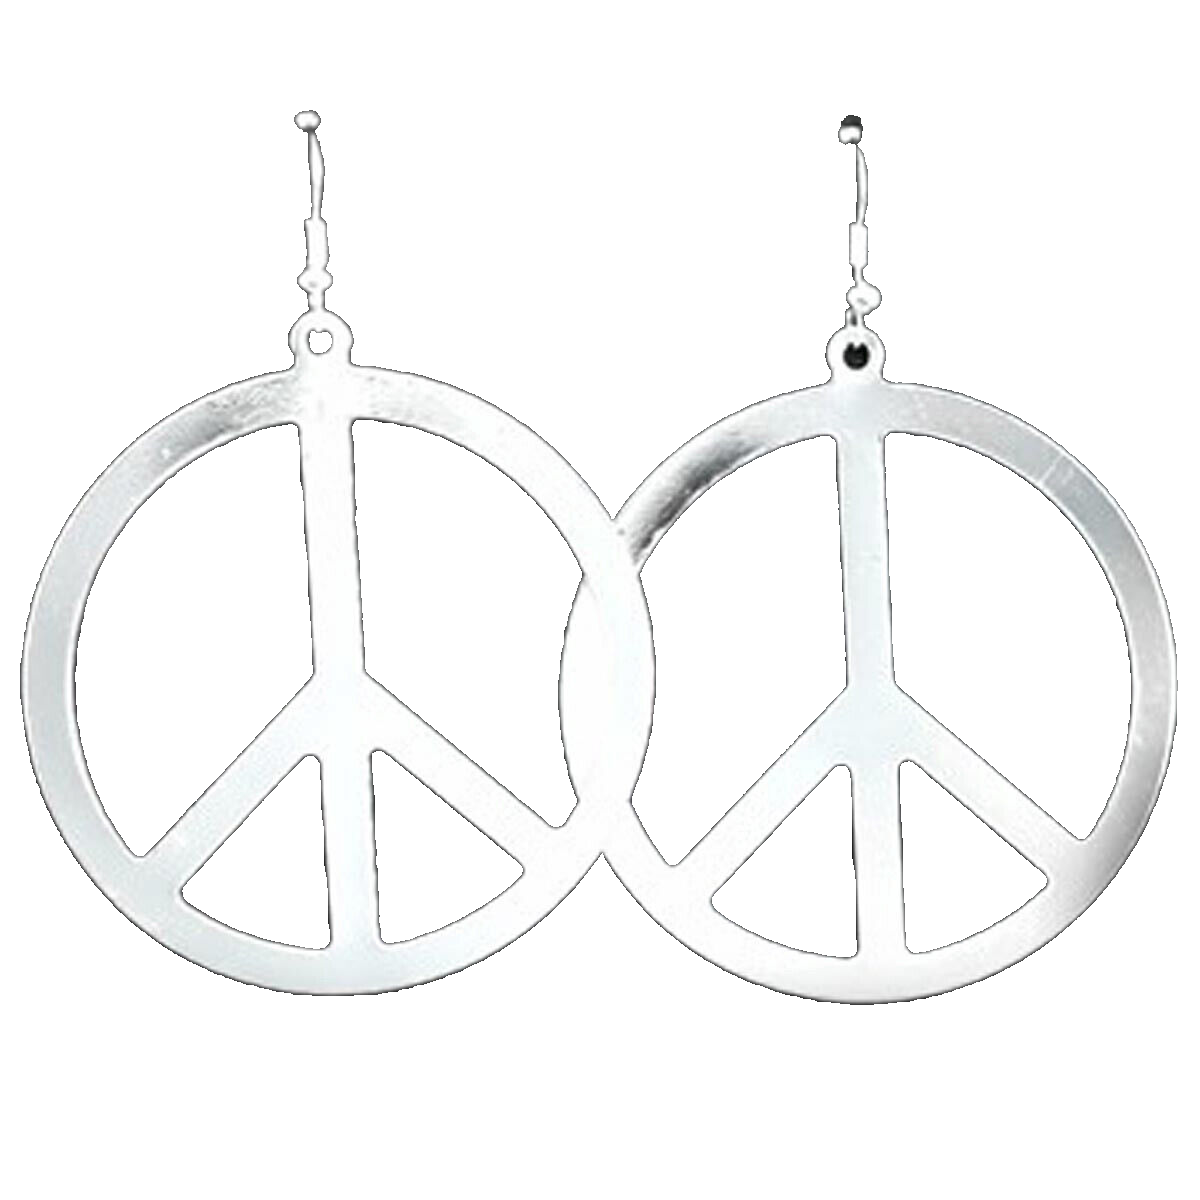 Big Funky Vintage PEACE SIGN EARRINGS Retro Hippy Costume Jewelry - SILVER Metal - £7.06 GBP